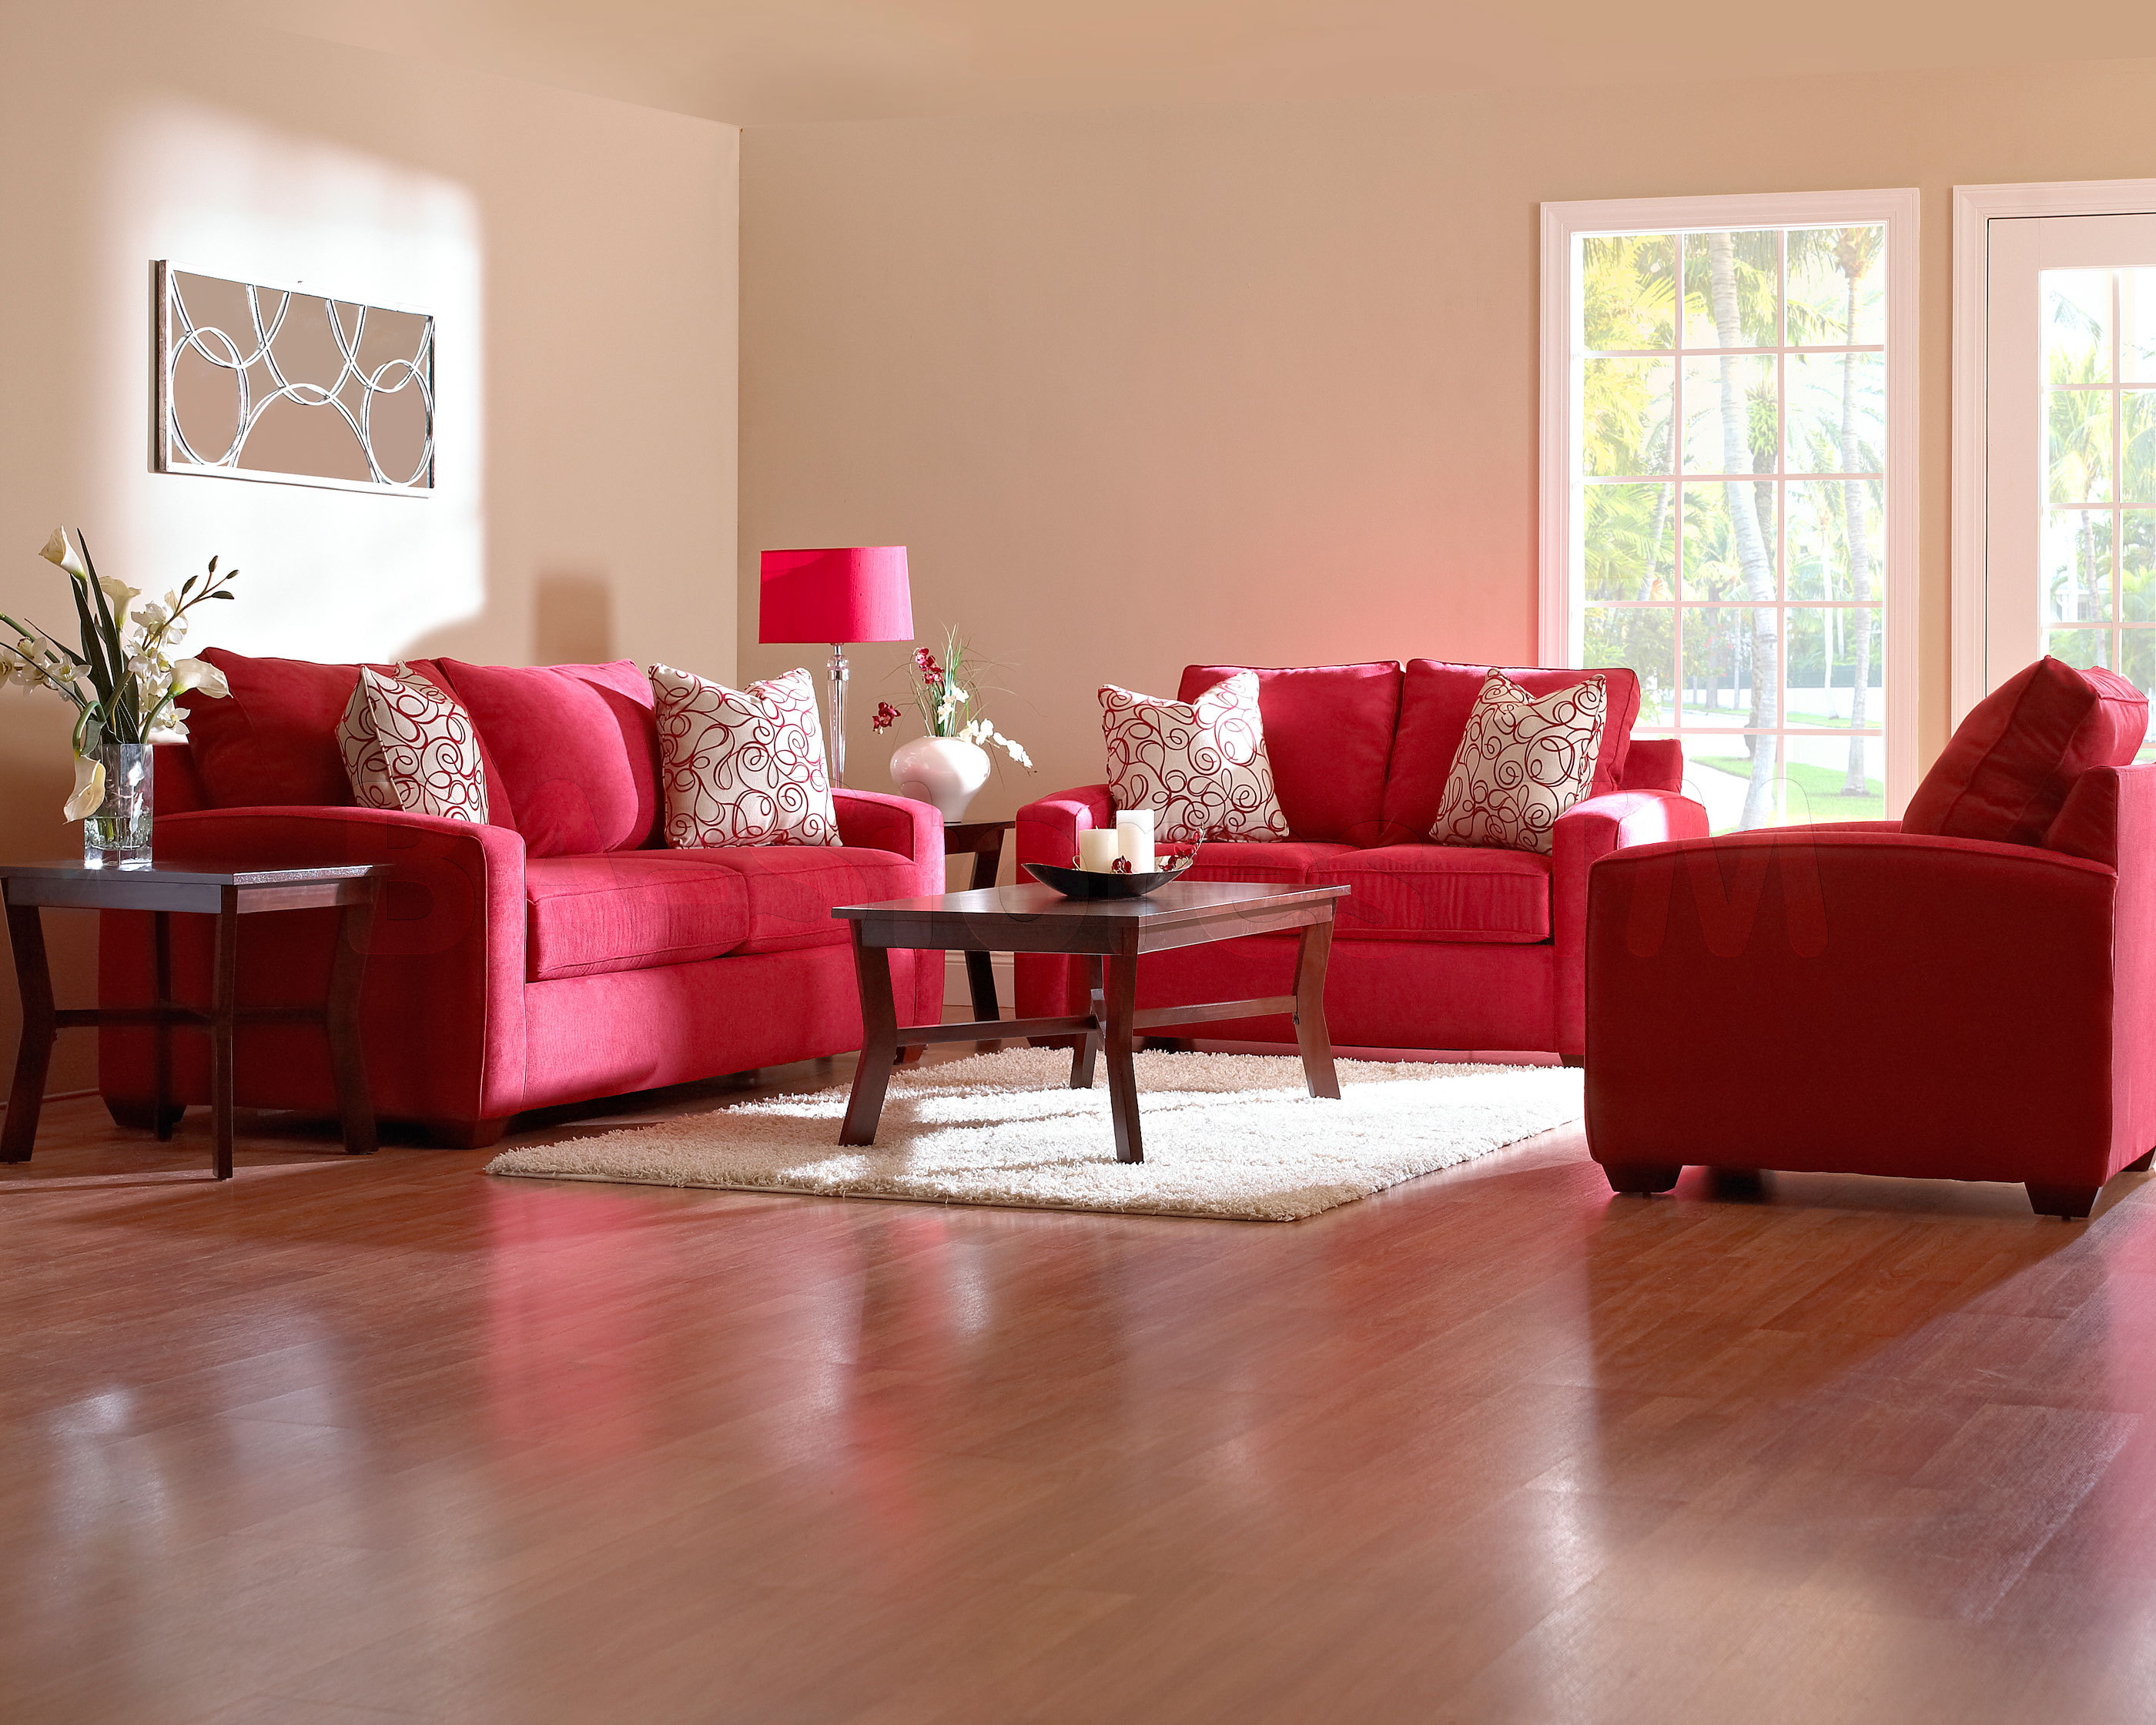 Red Sofa And Cherry Wood Living Room